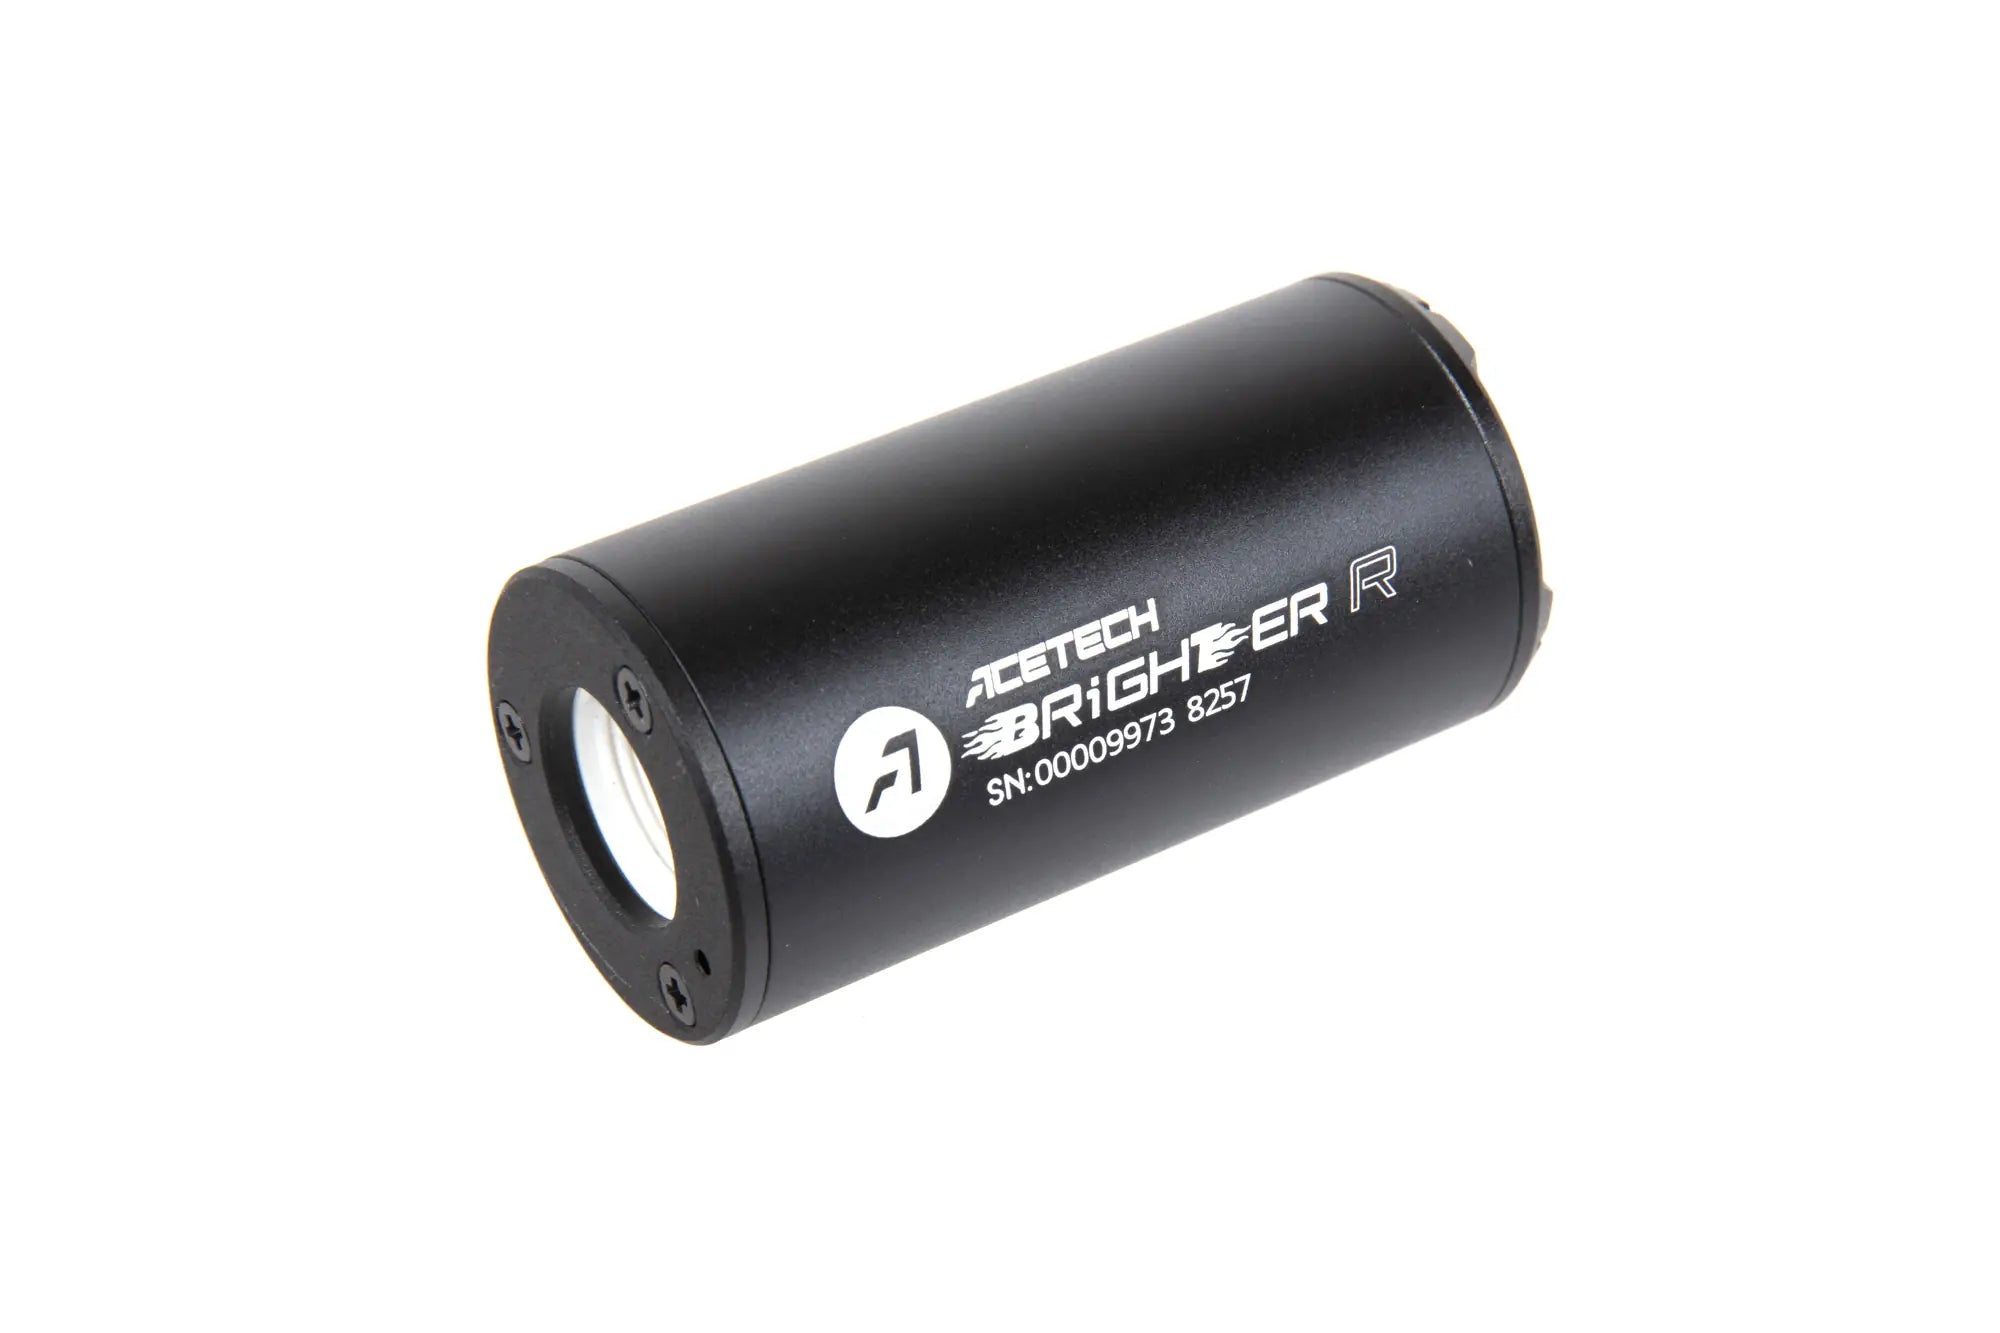 Tracer AceTech Brighter R M14 CCW silencer